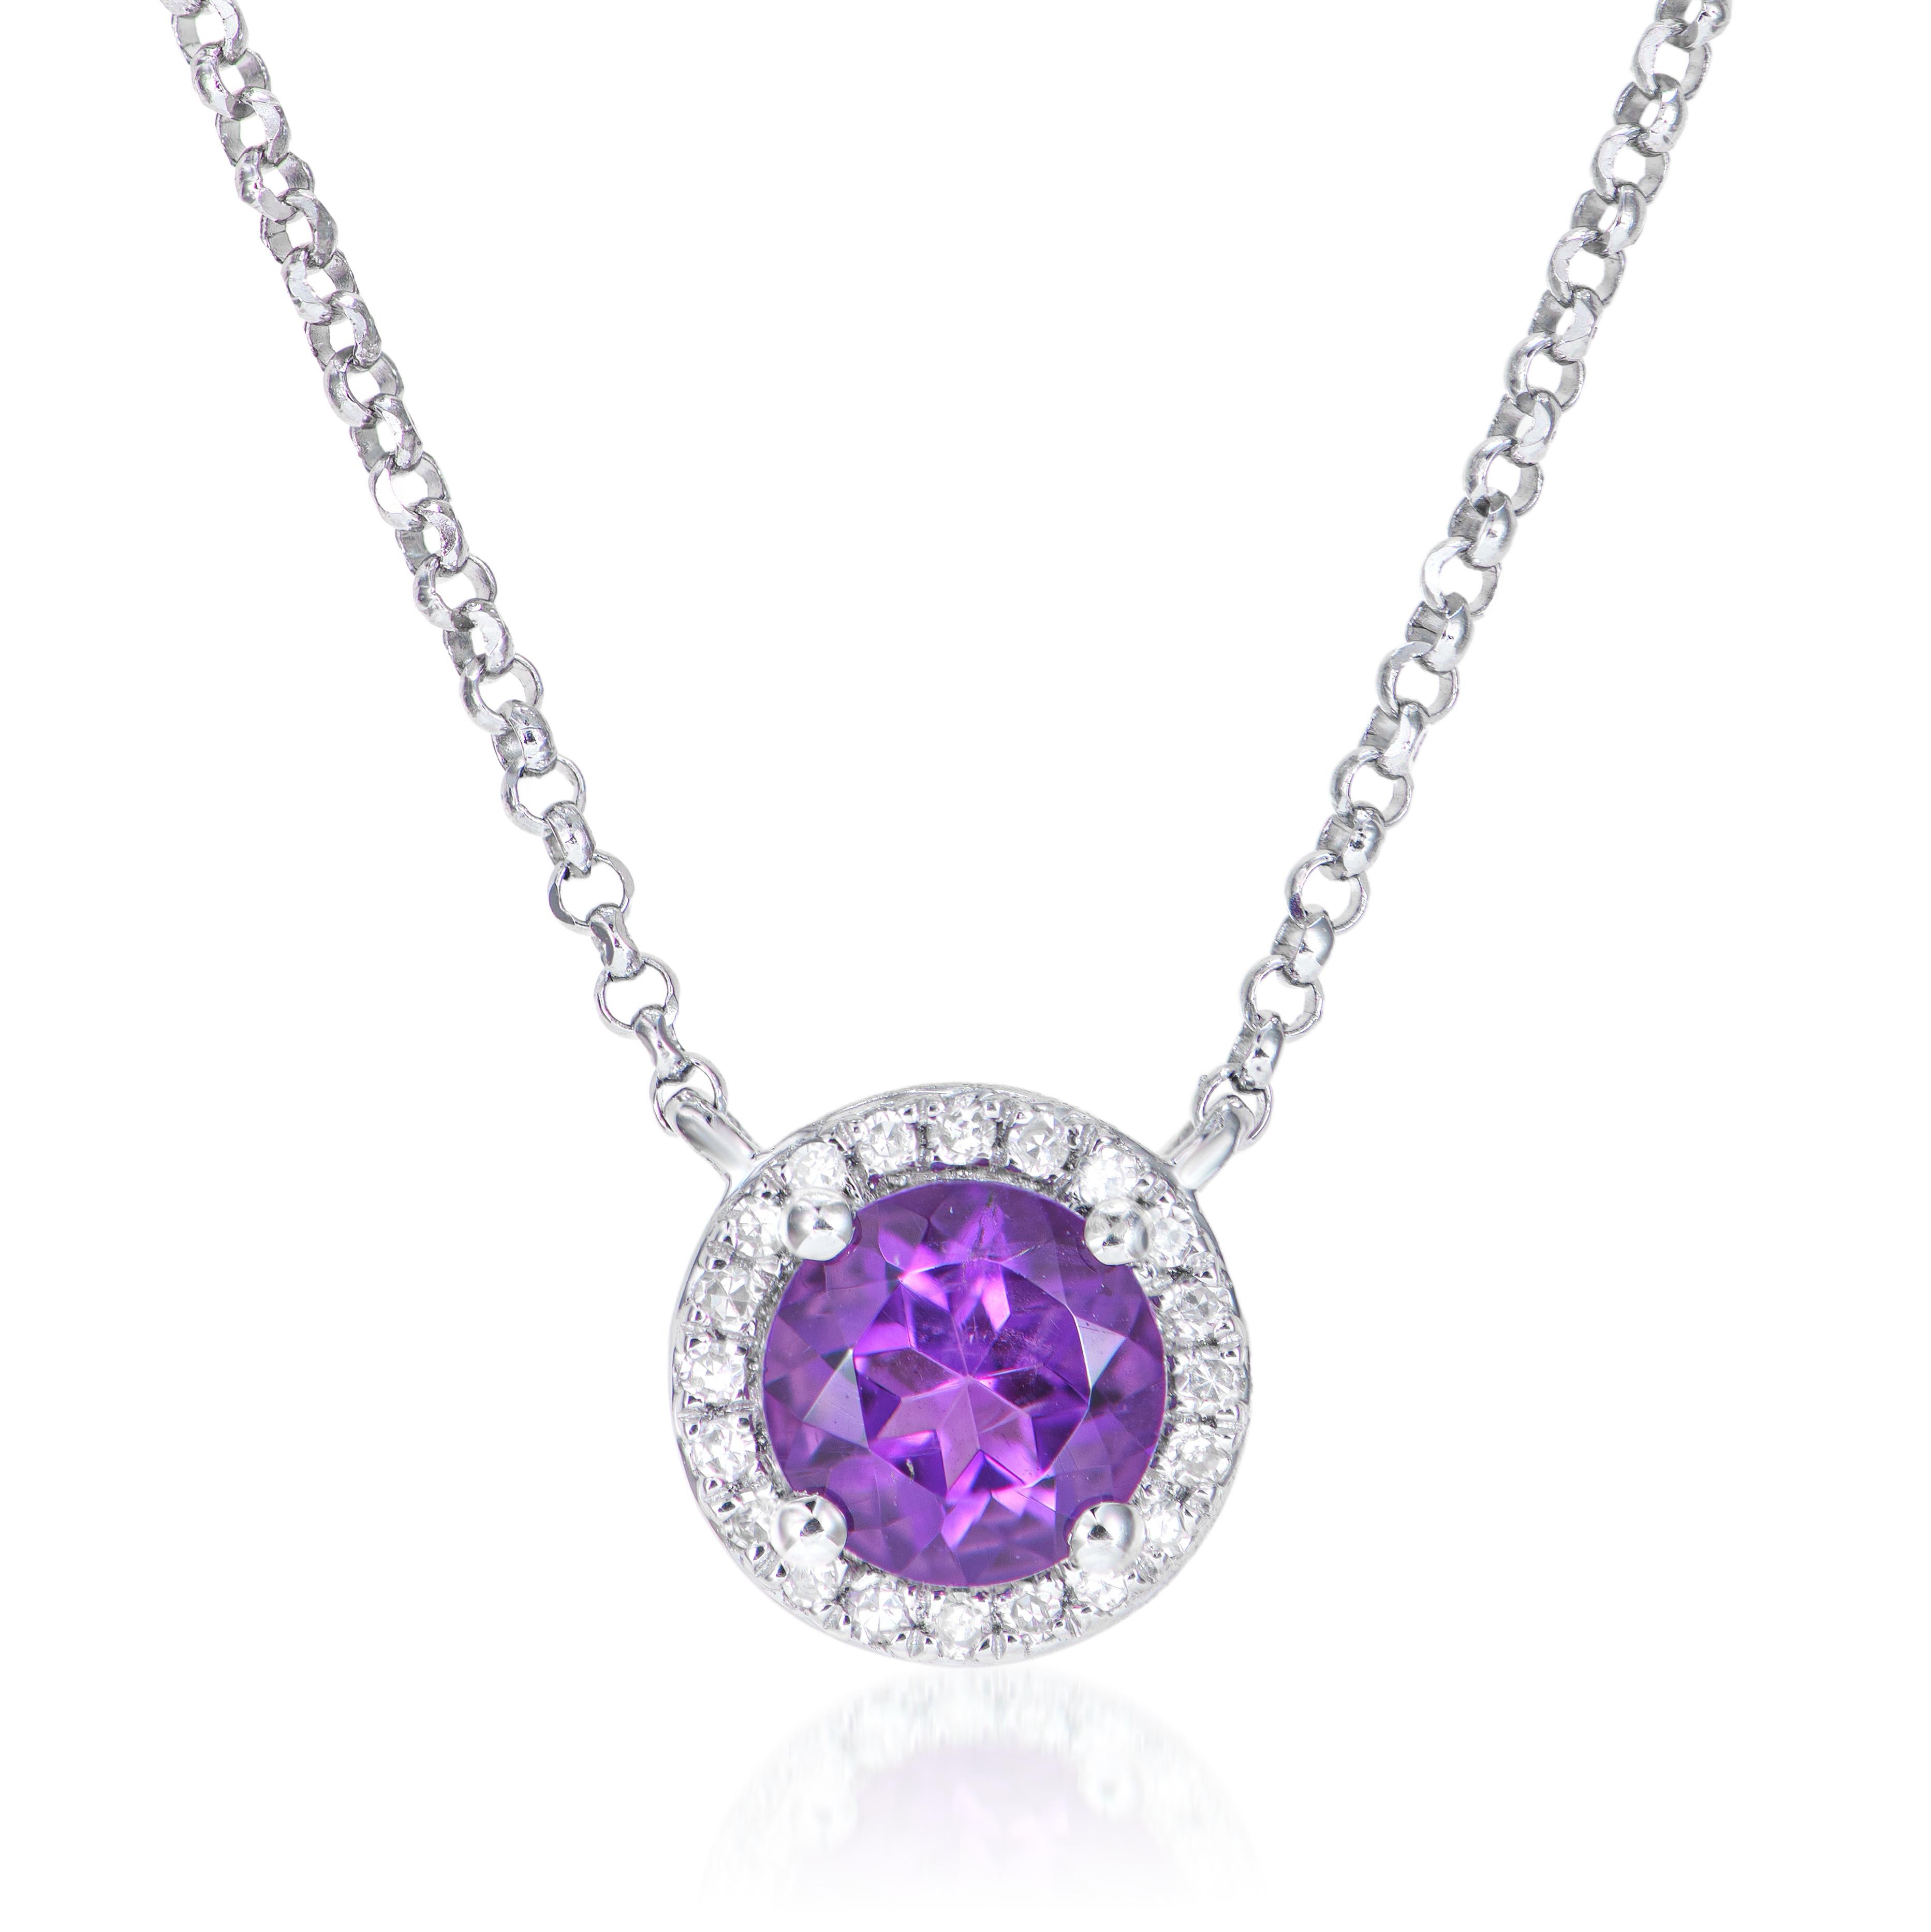 Contemporary 0.40 Carat Amethyst Pendant in 18Karat White Gold with White Diamond. For Sale